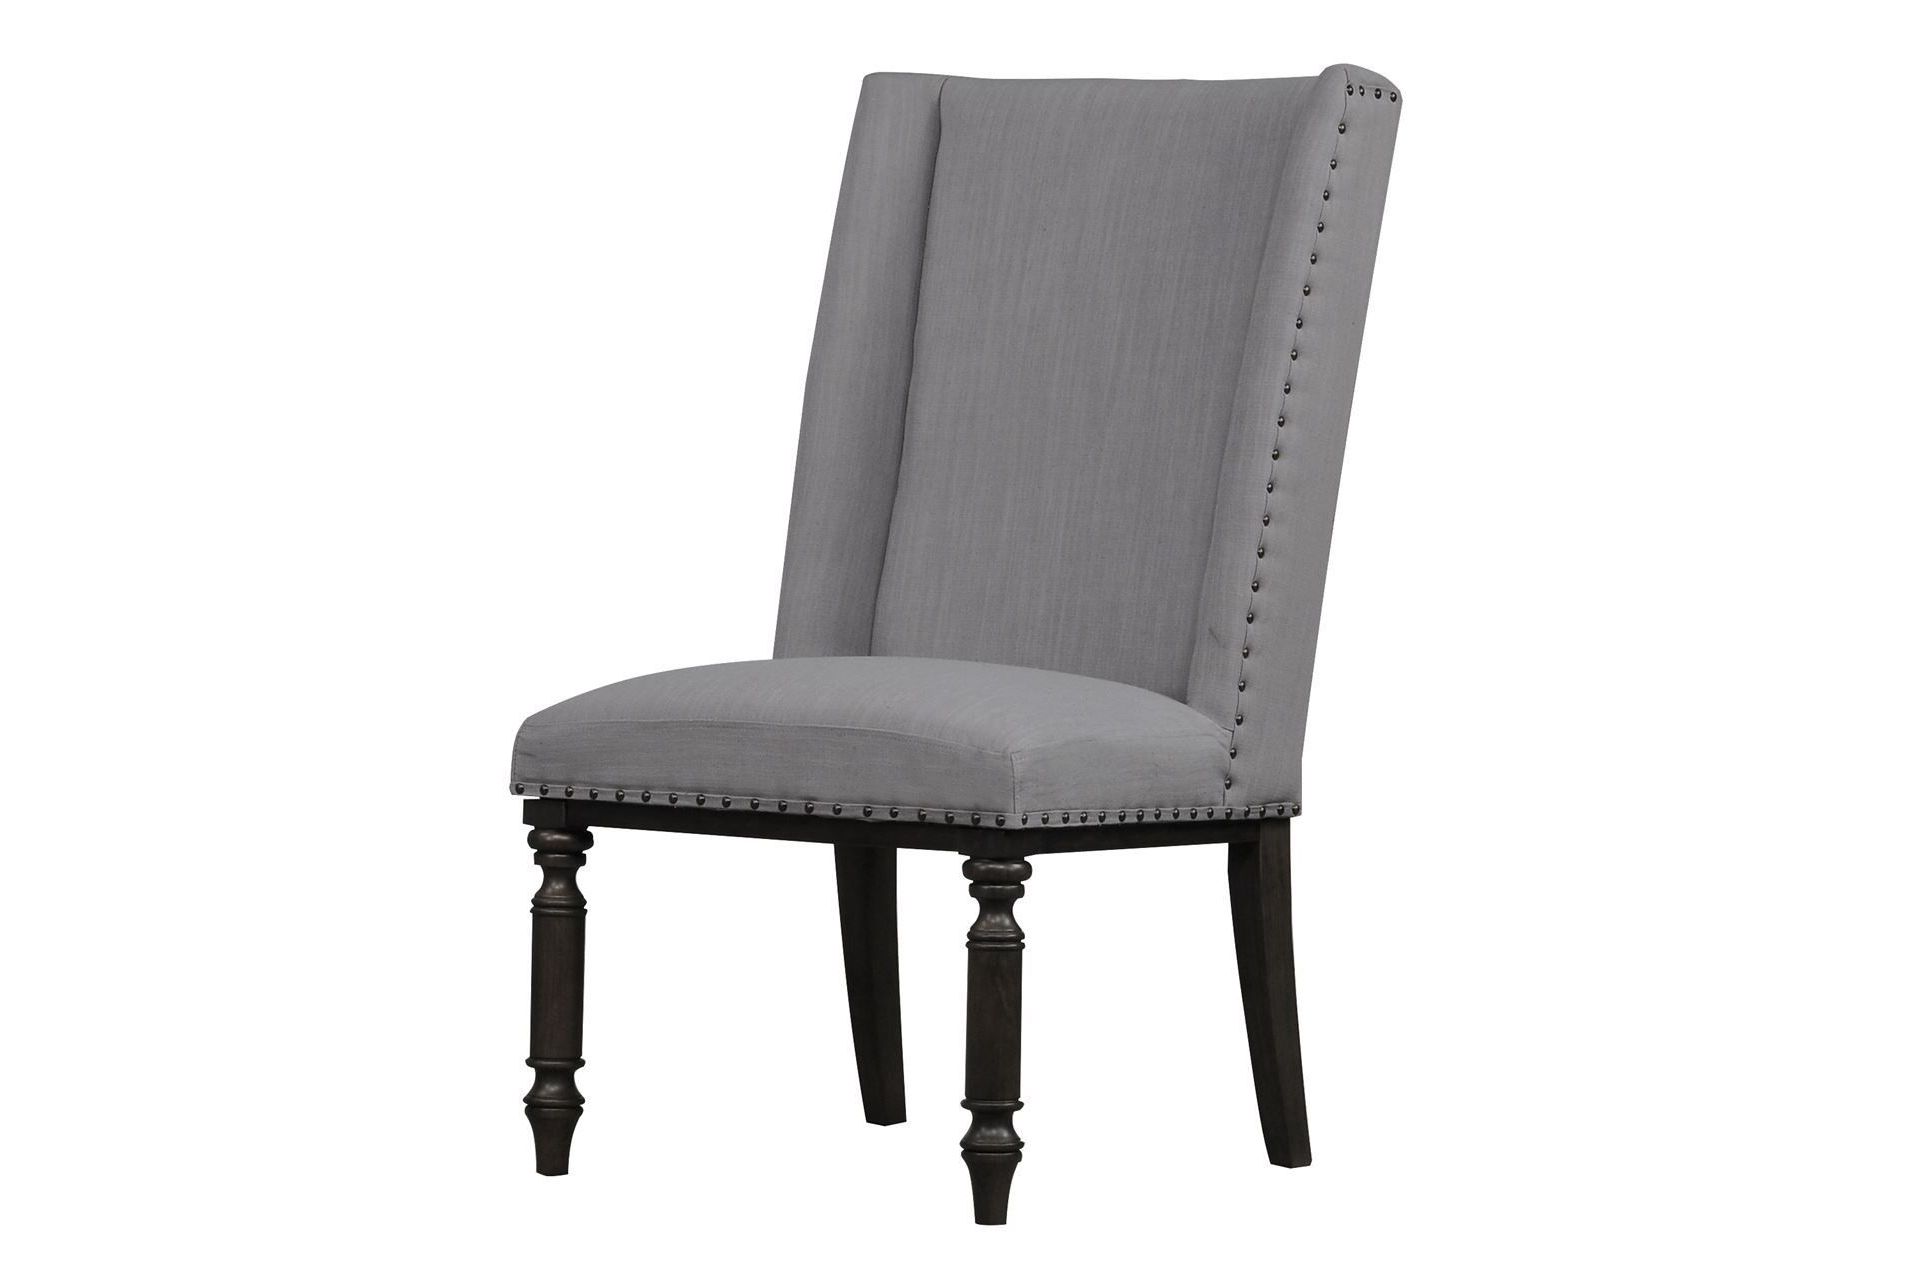 2018 Laurel Captains Chair, Grey Pertaining To Chapleau Ii Arm Chairs (View 8 of 20)